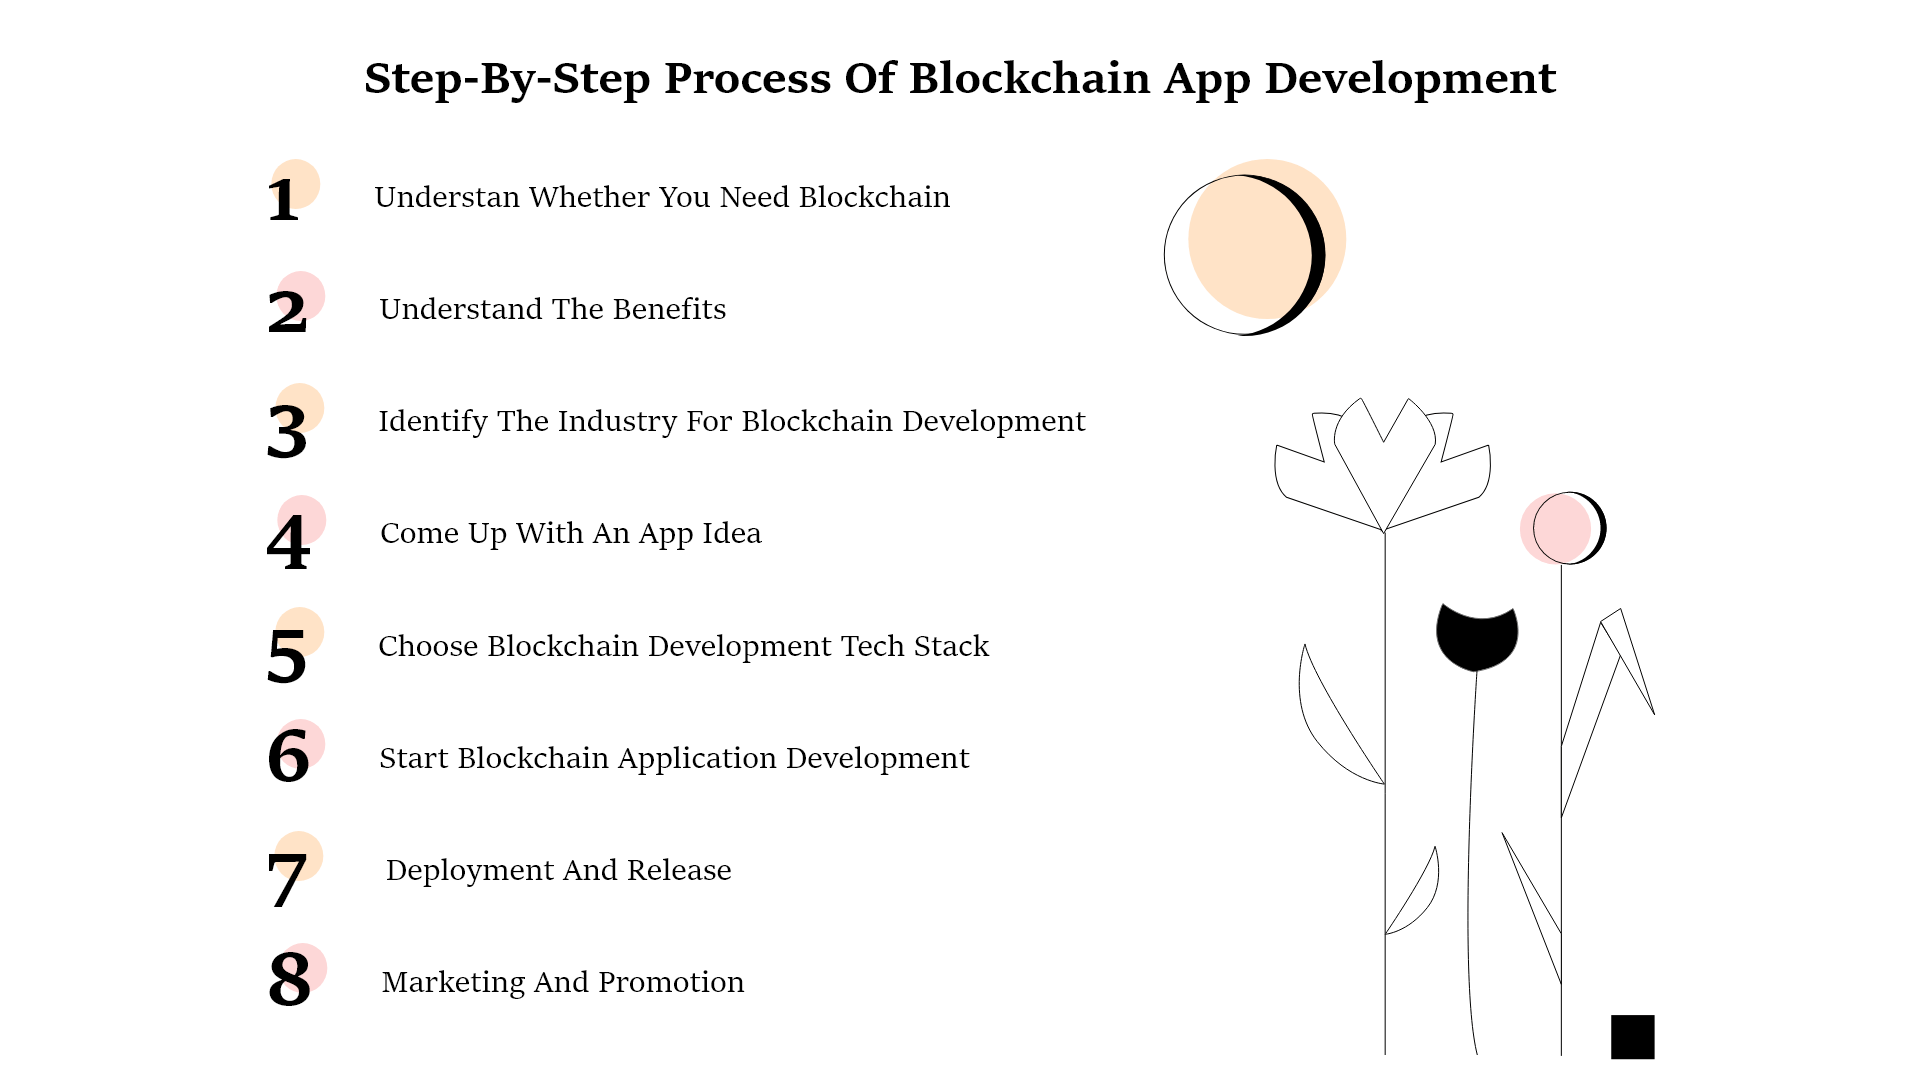 How to Build a Blockchain App: Tech and Business Guide 2